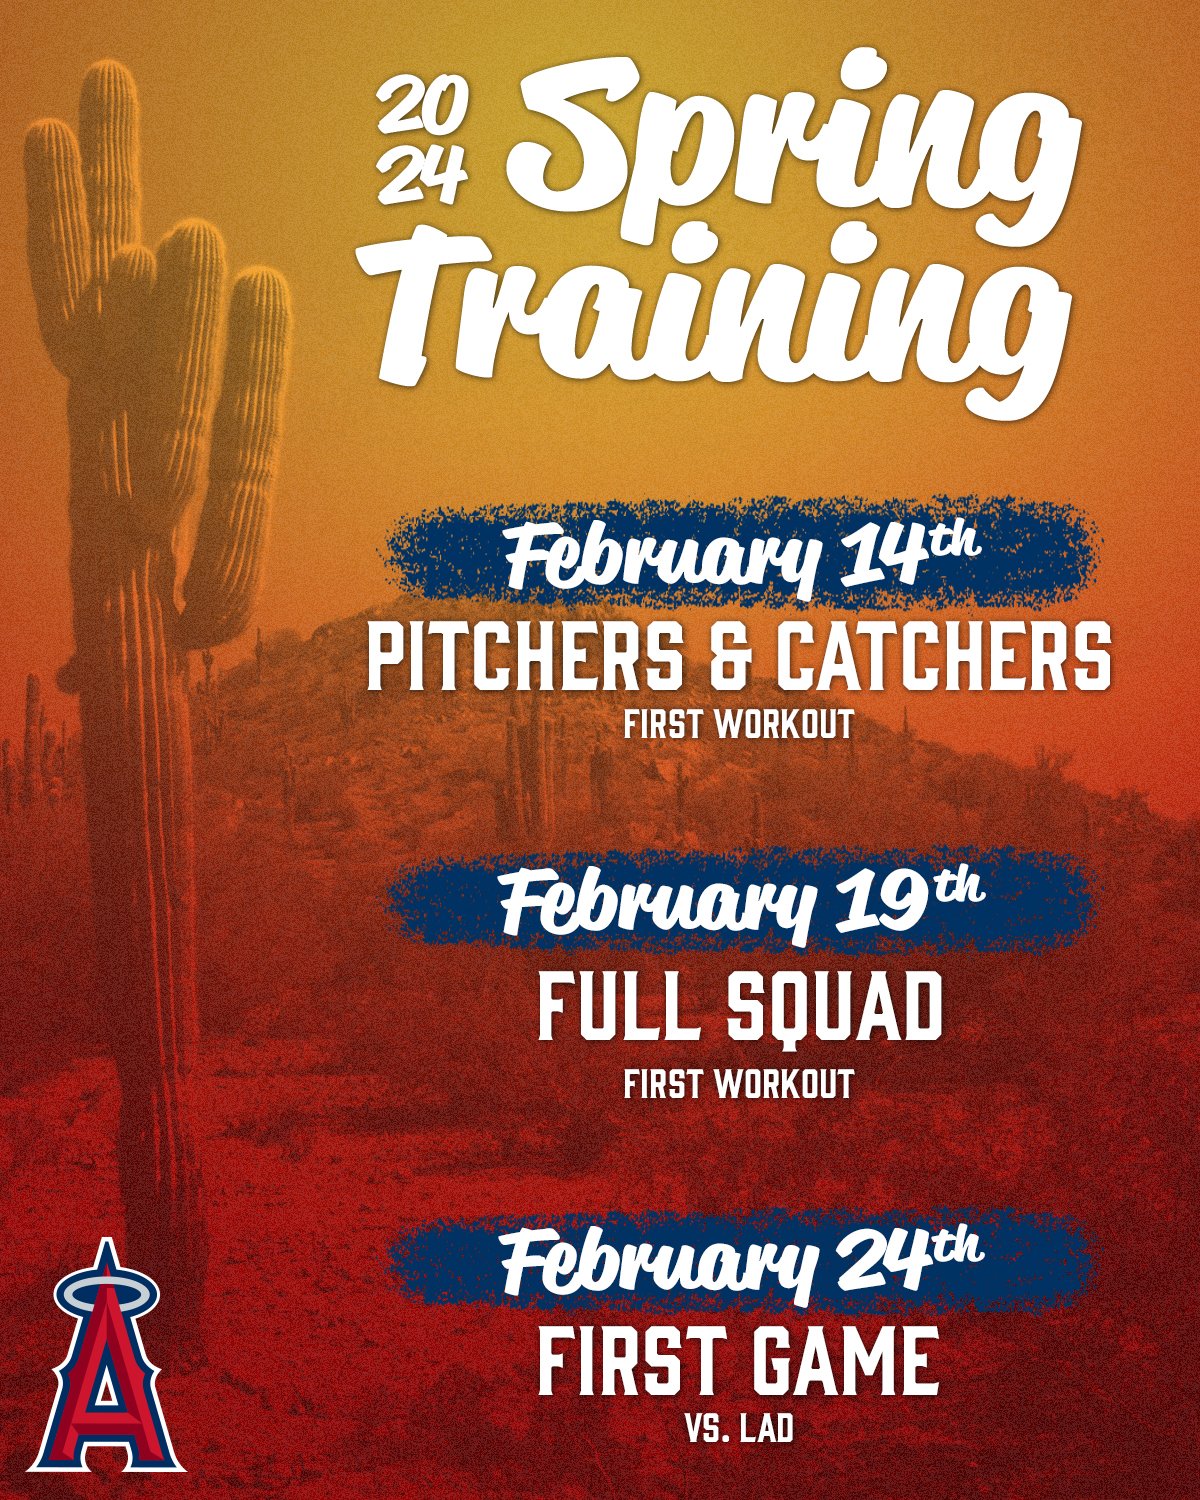 Angels Spring Training report dates